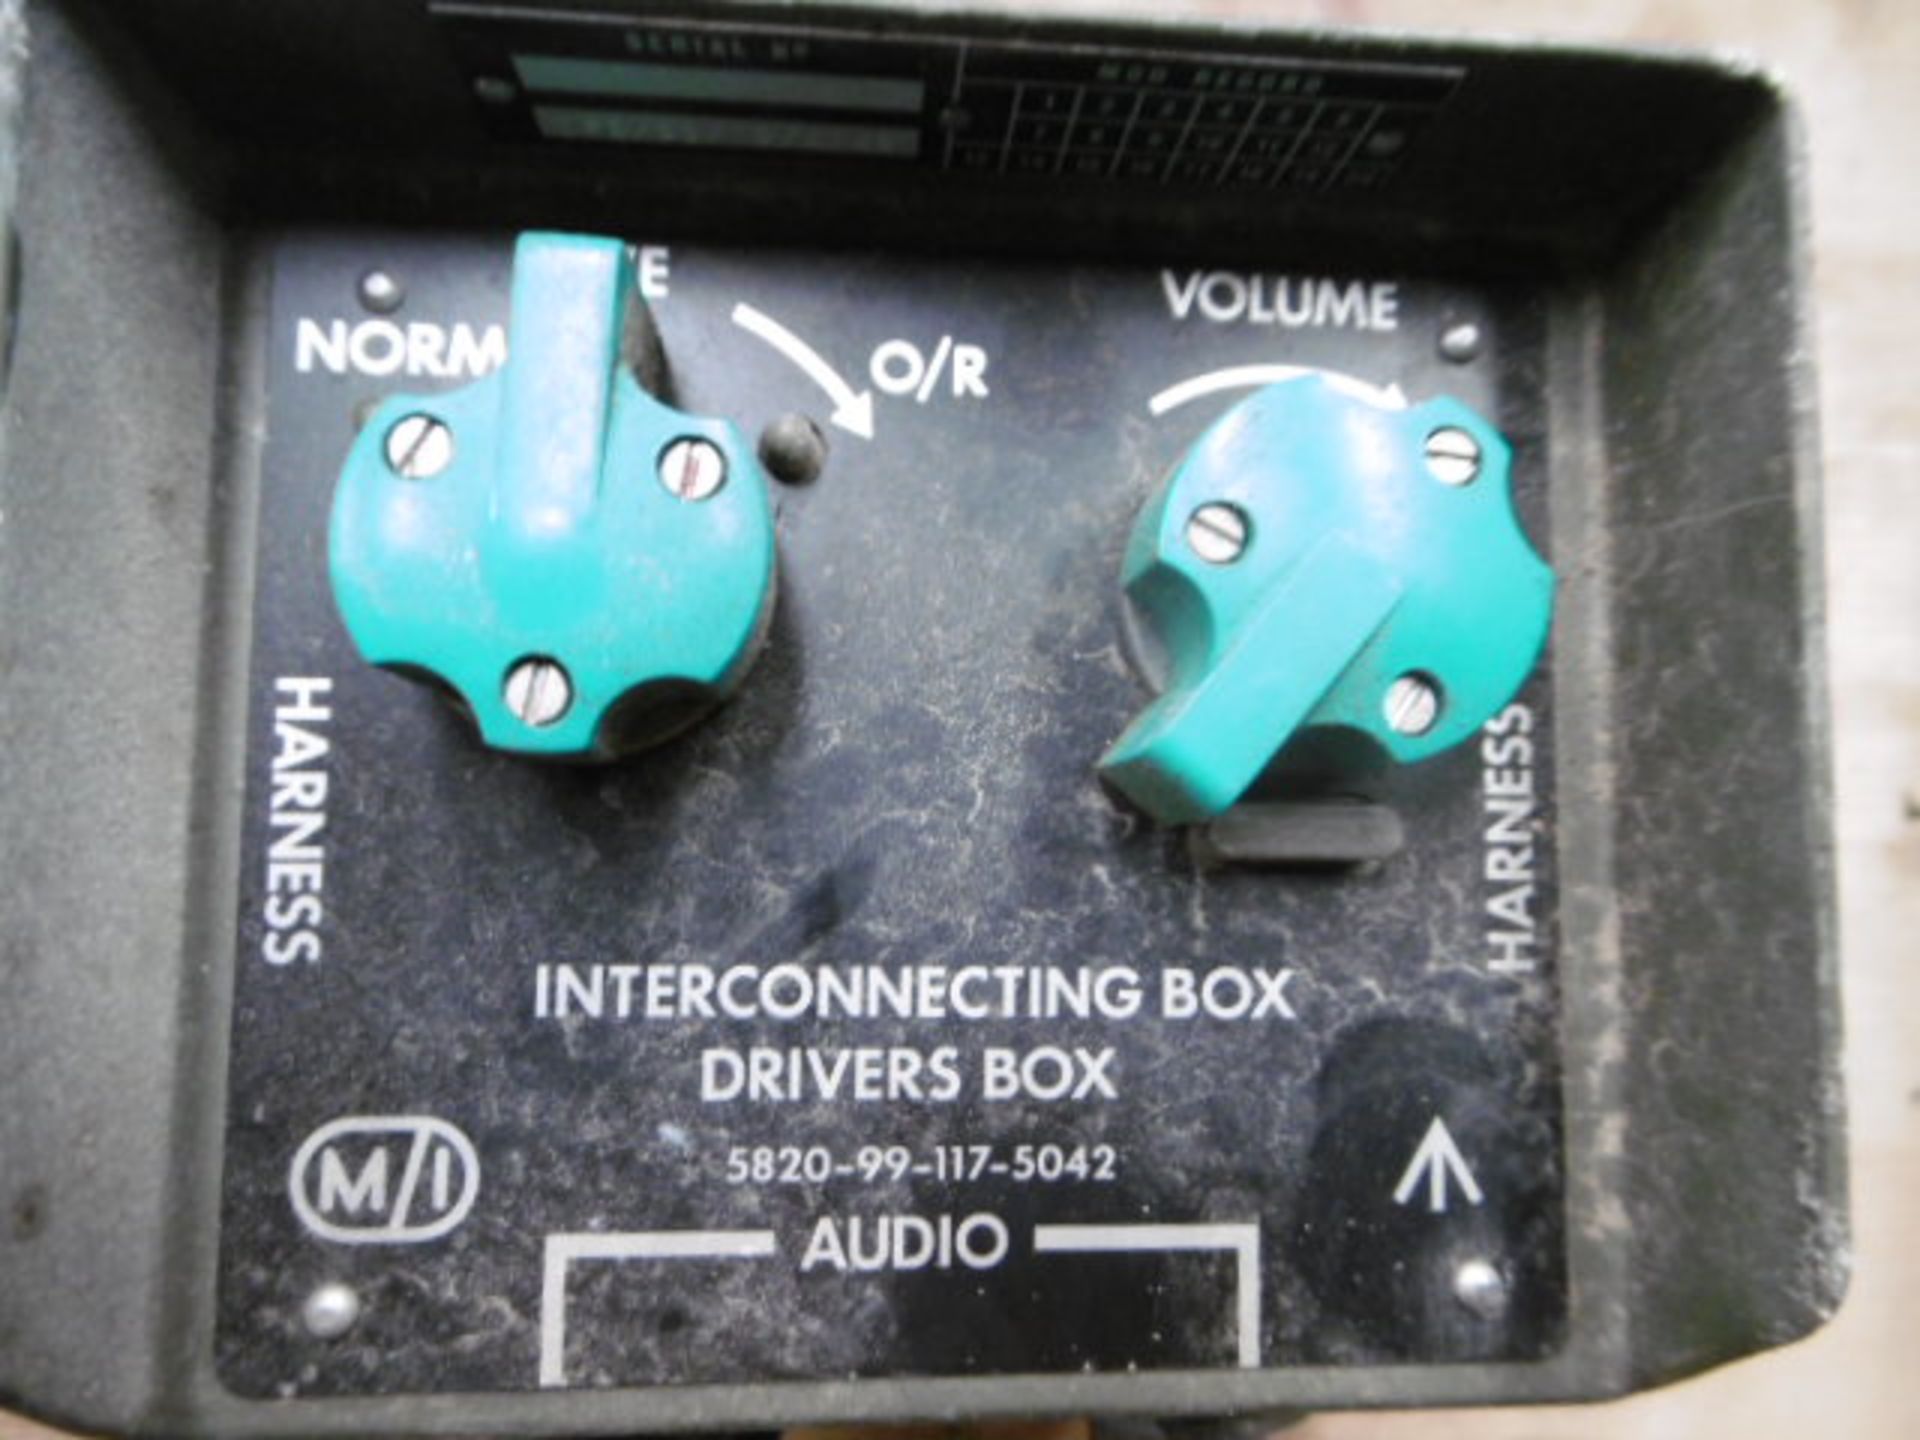 2 x Interconnecting Drivers Boxes - Image 2 of 4